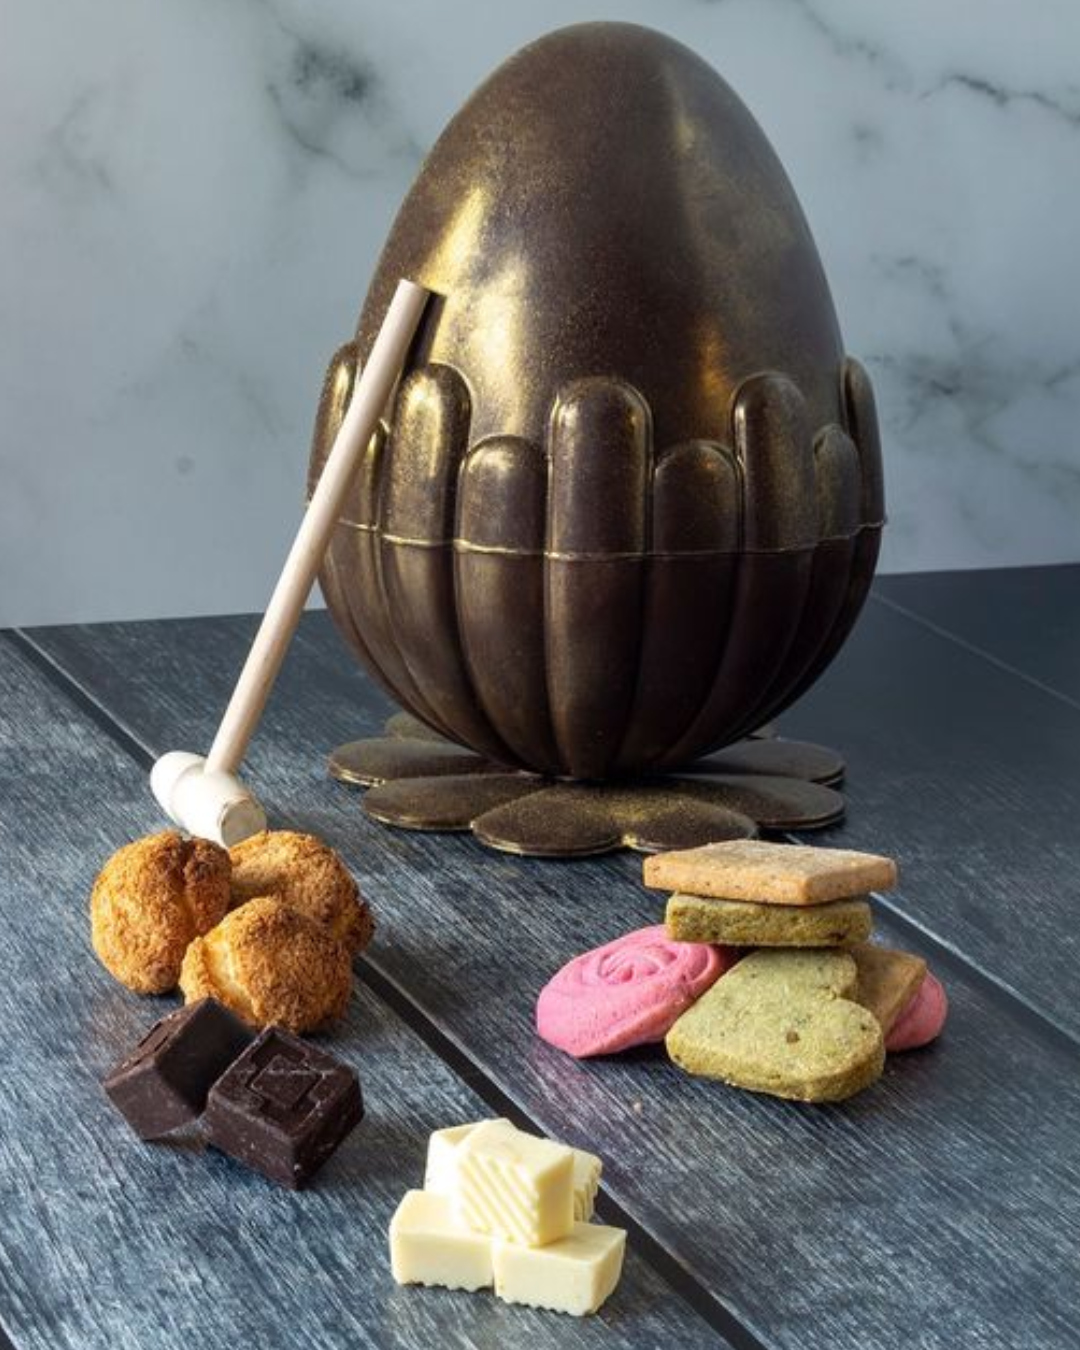 A chocolate egg with a small wooden hammer next to it.